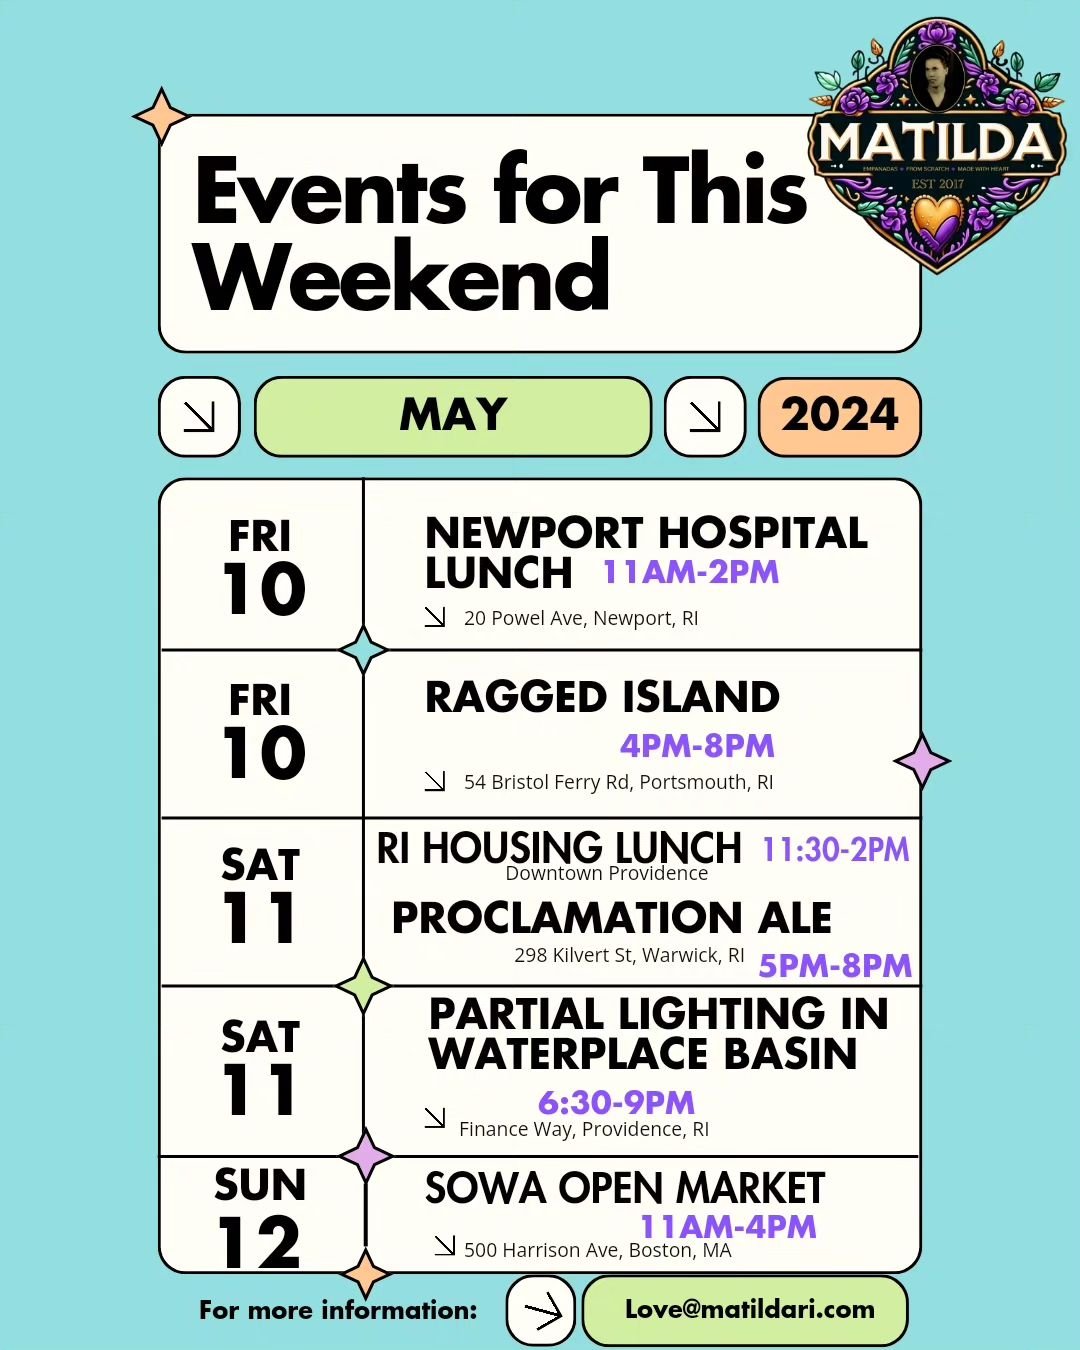 Get ready for an epic weekend line-up! 🌟 We kicked things off with a double event on Friday-Newport Hospital 11am-2pm, followed by Ragged Island 4pm-8pm. 

We're gearing up for a triple dose of fun. Saturday starts in Downtown Providence with a lunc